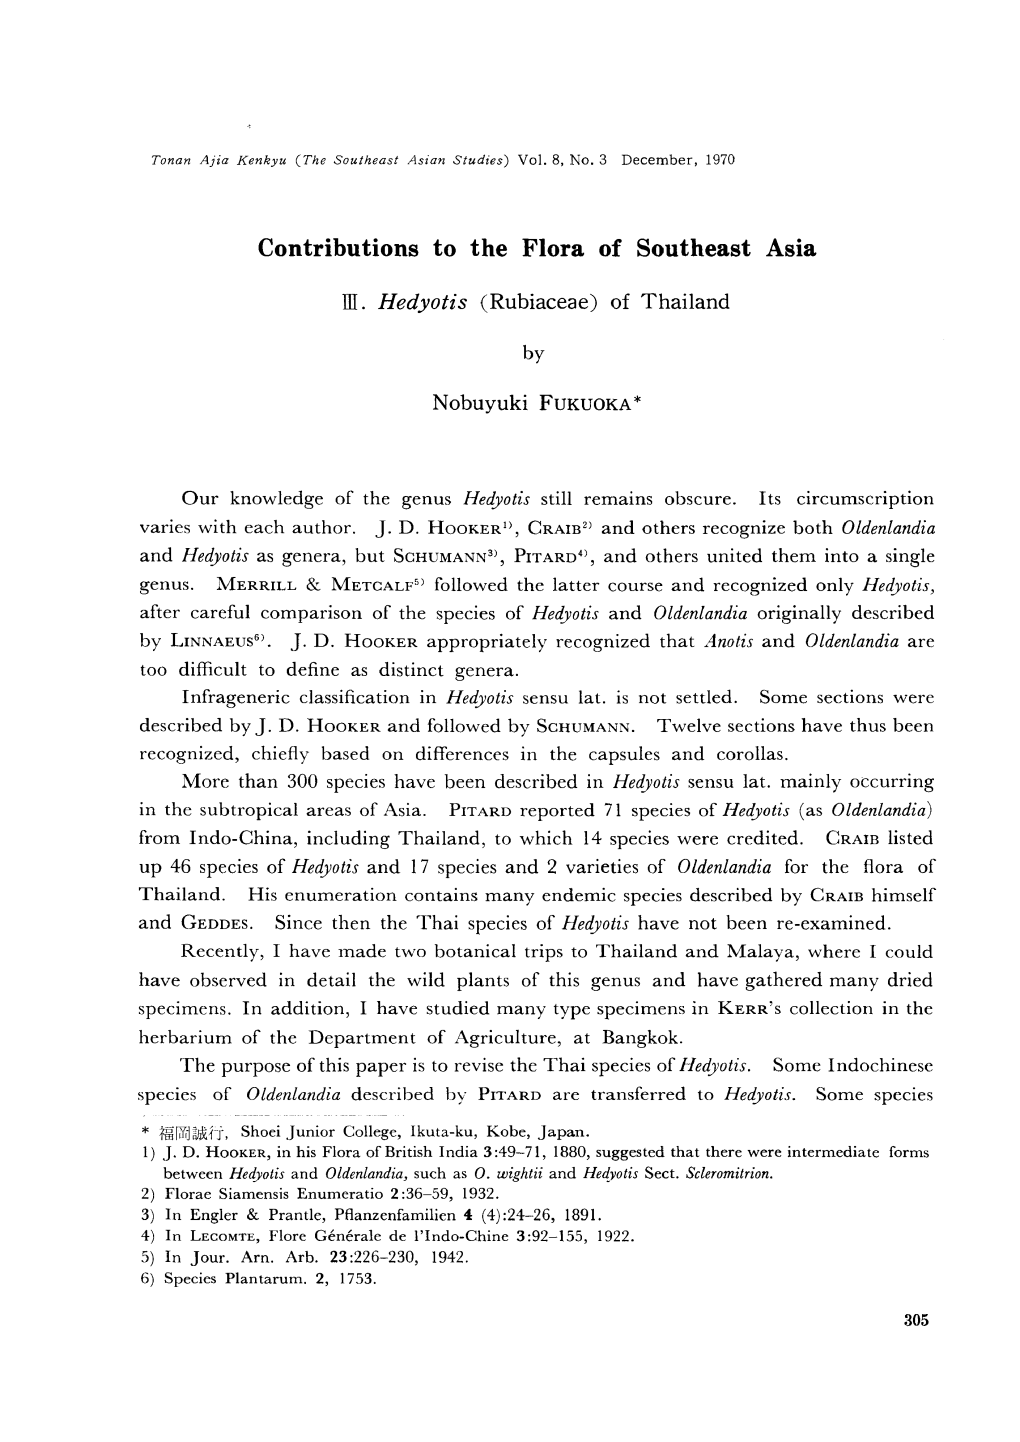 Contributions to the Flora of Southeast Asia